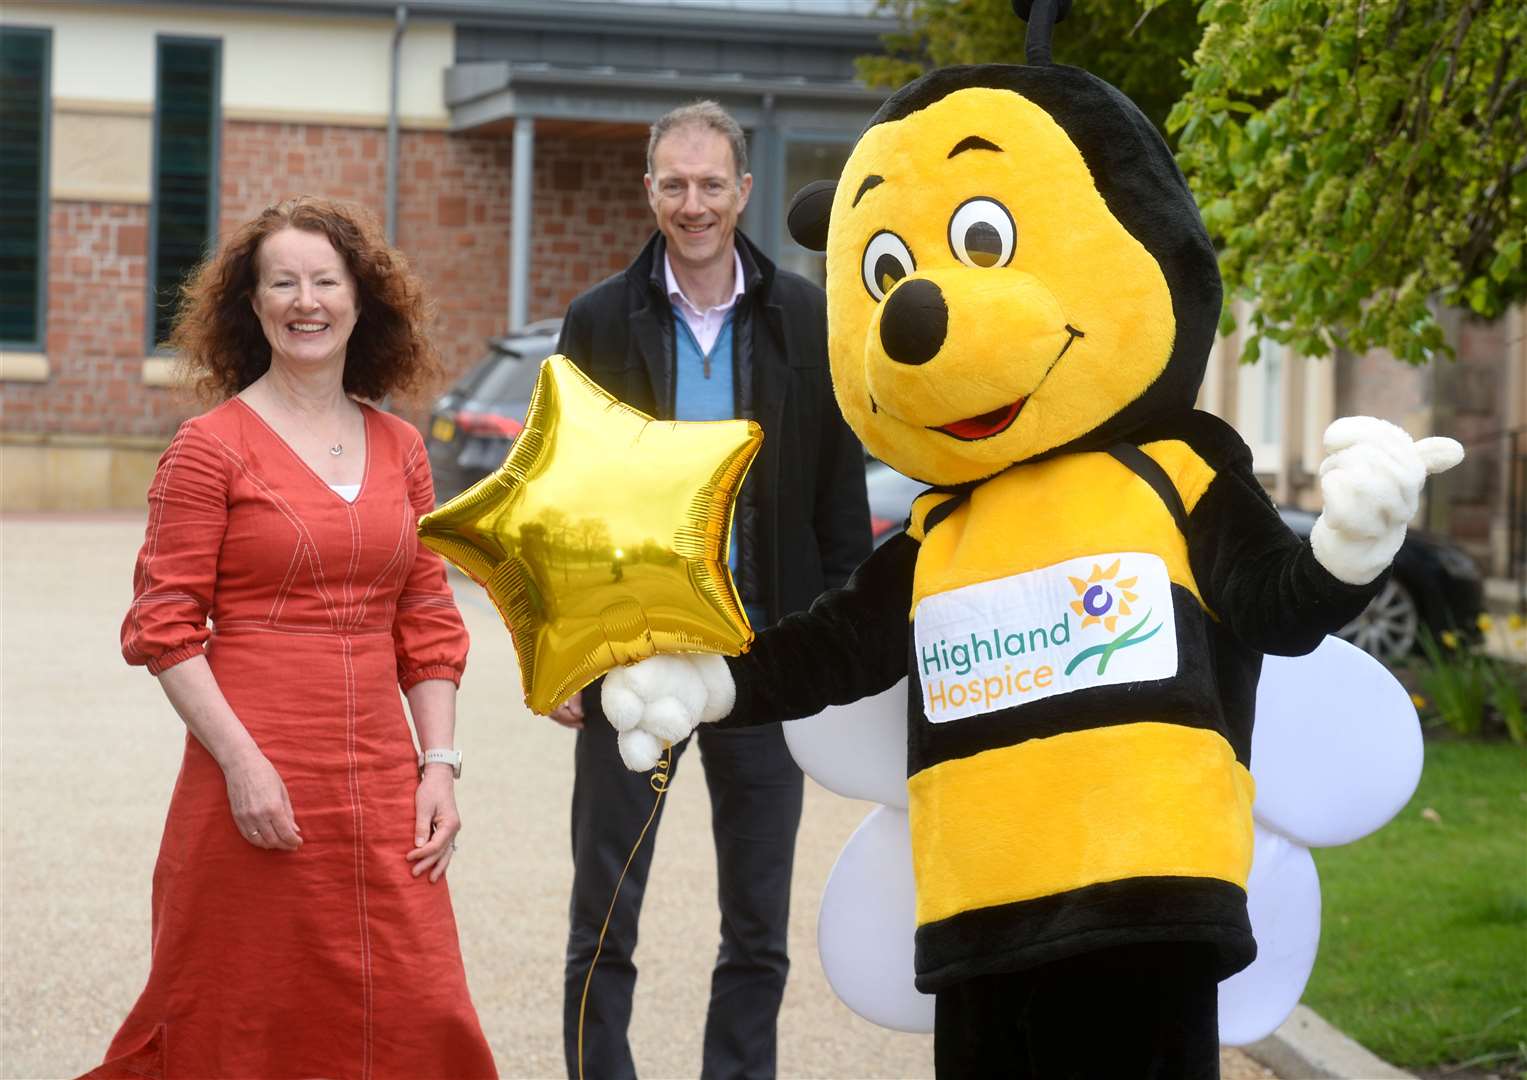 Highland Hospice is awarded an Investors in People Gold Award. Seeing gold are, from left, Linda Lawton, Kenny Steele and hospice mascot Bobby the Bee. Picture: Gary Anthony